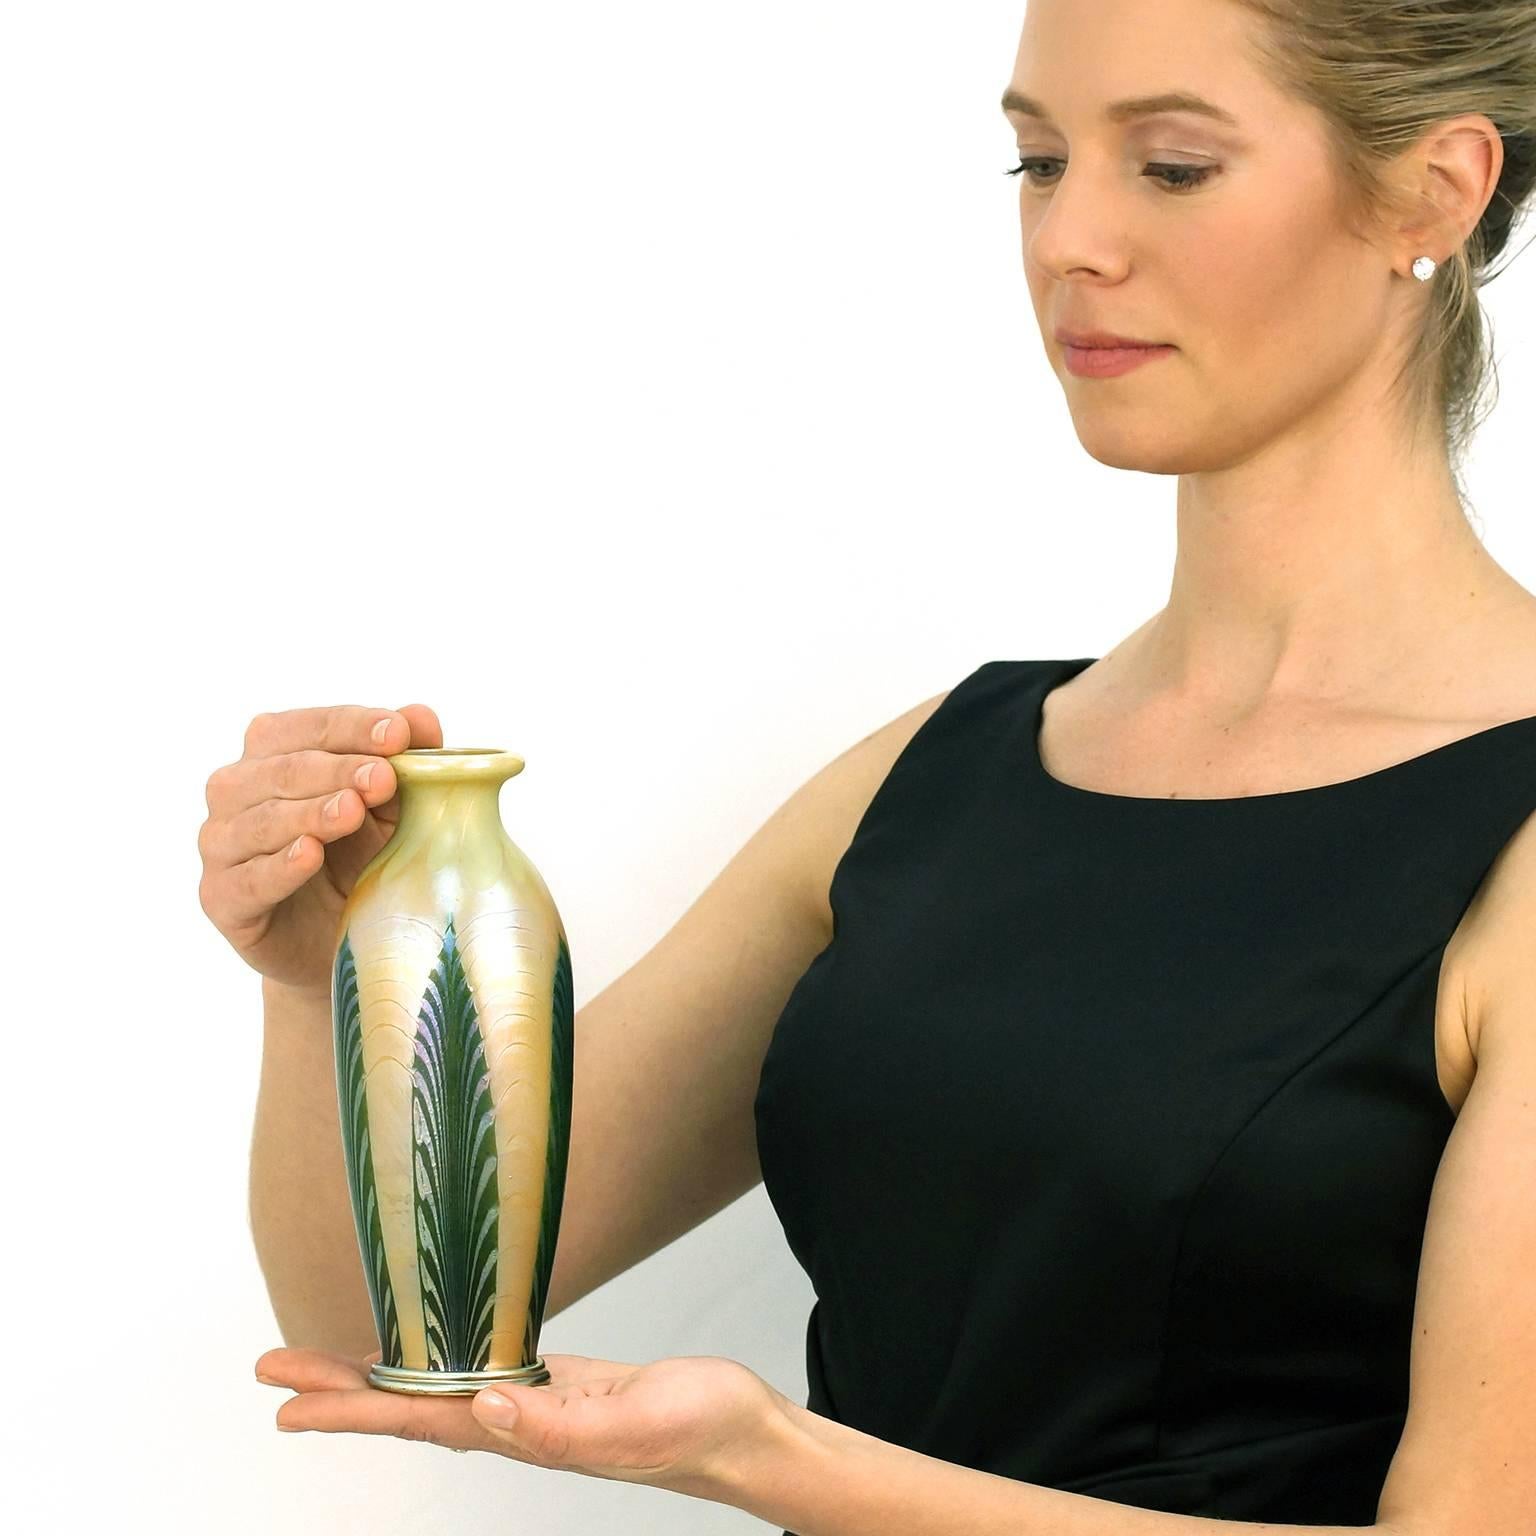 Circa 1910, Louis Comfort Tiffany, Tiffany Studios, New York.  This rare Louis Comfort Tiffany vase features gold Favril and aventurine green glass in a pulled feather design with a gold aurene foot.  Its pleasing form and stunning color combination